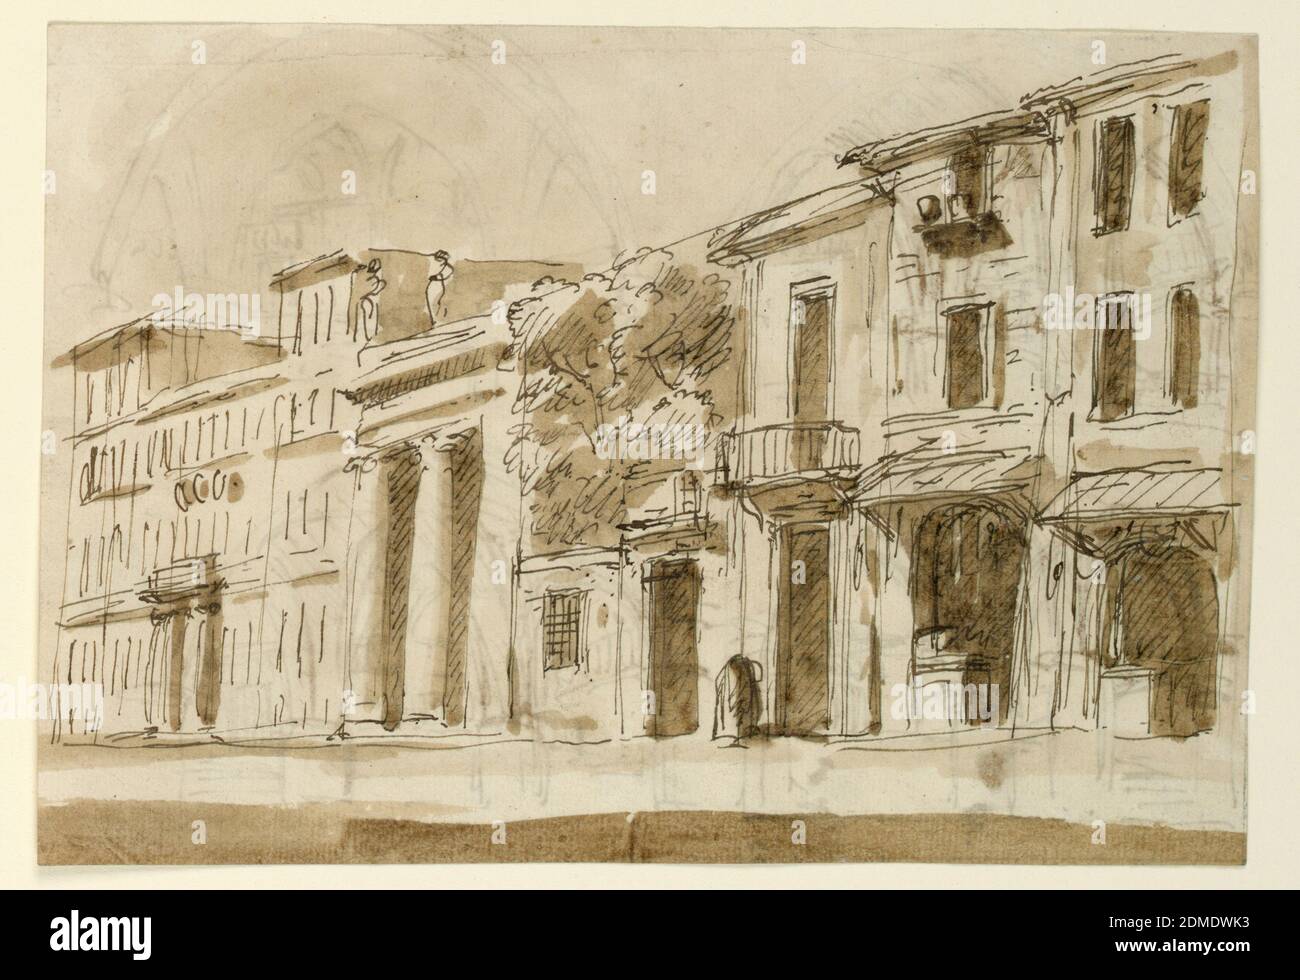 Theatre Design: Streetscape, Pen and brown ink, brush and brown wash on off-white laid paper, View of a street. At left, a building with two columns and attic sculptures. At center, a tree grows from a rear courtyard., Italy, late 18th century, architecture, Drawing Stock Photo